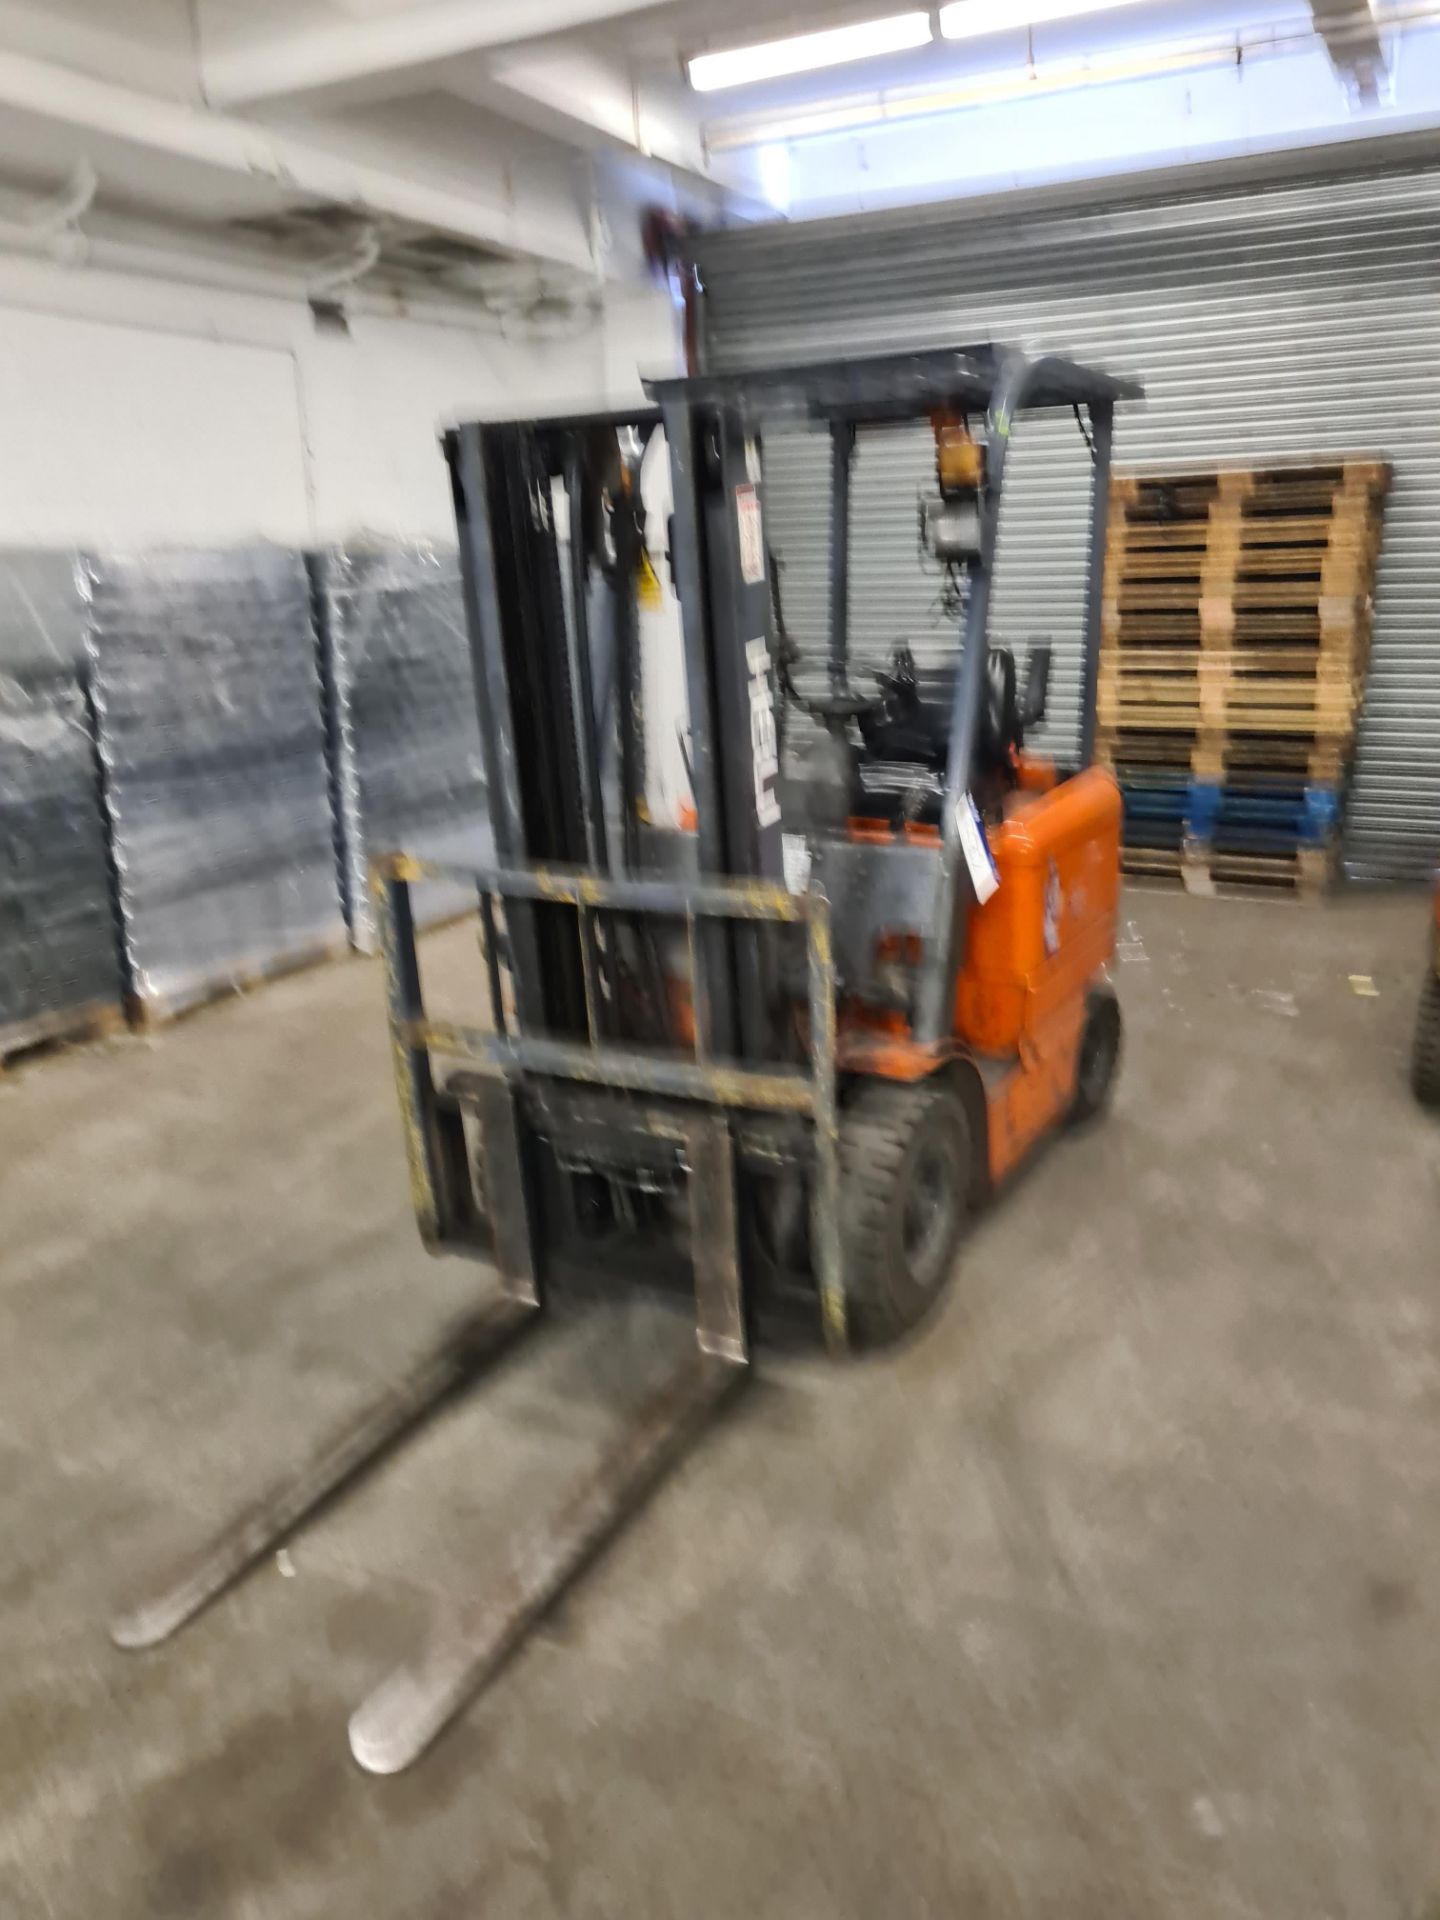 Heli HFB15 Electric Forklift, serial no. C7084, SWL 1500kg, lift height 3m, indicated hours 4667.